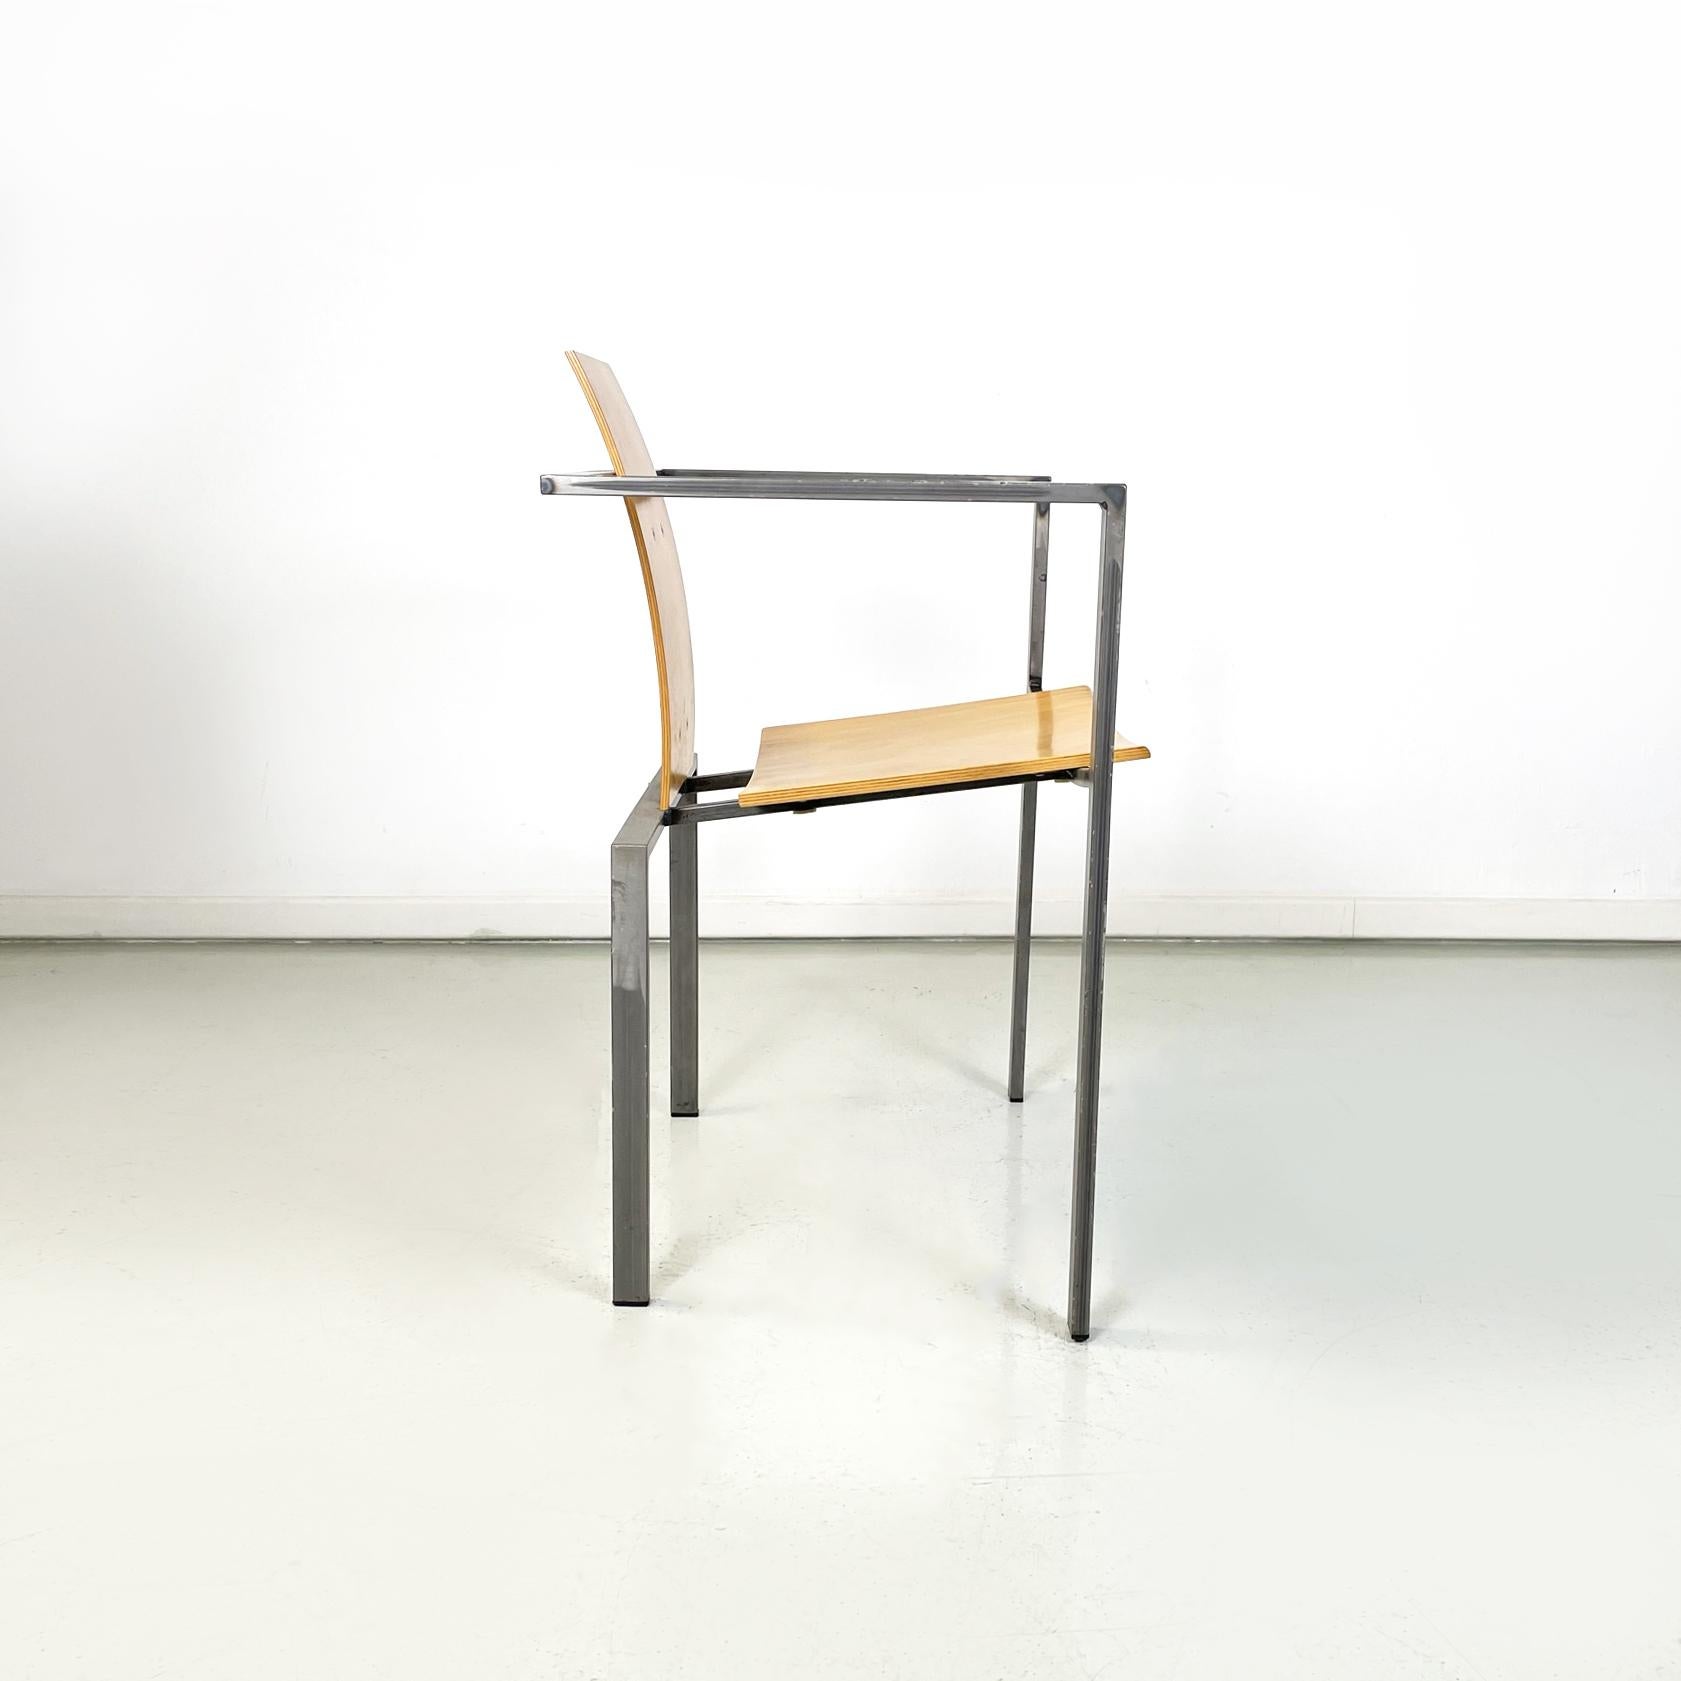 German Modern Squared Chair in Wood and Metal by Karl-Friedrich Foster KKF, 1980 In Good Condition For Sale In MIlano, IT